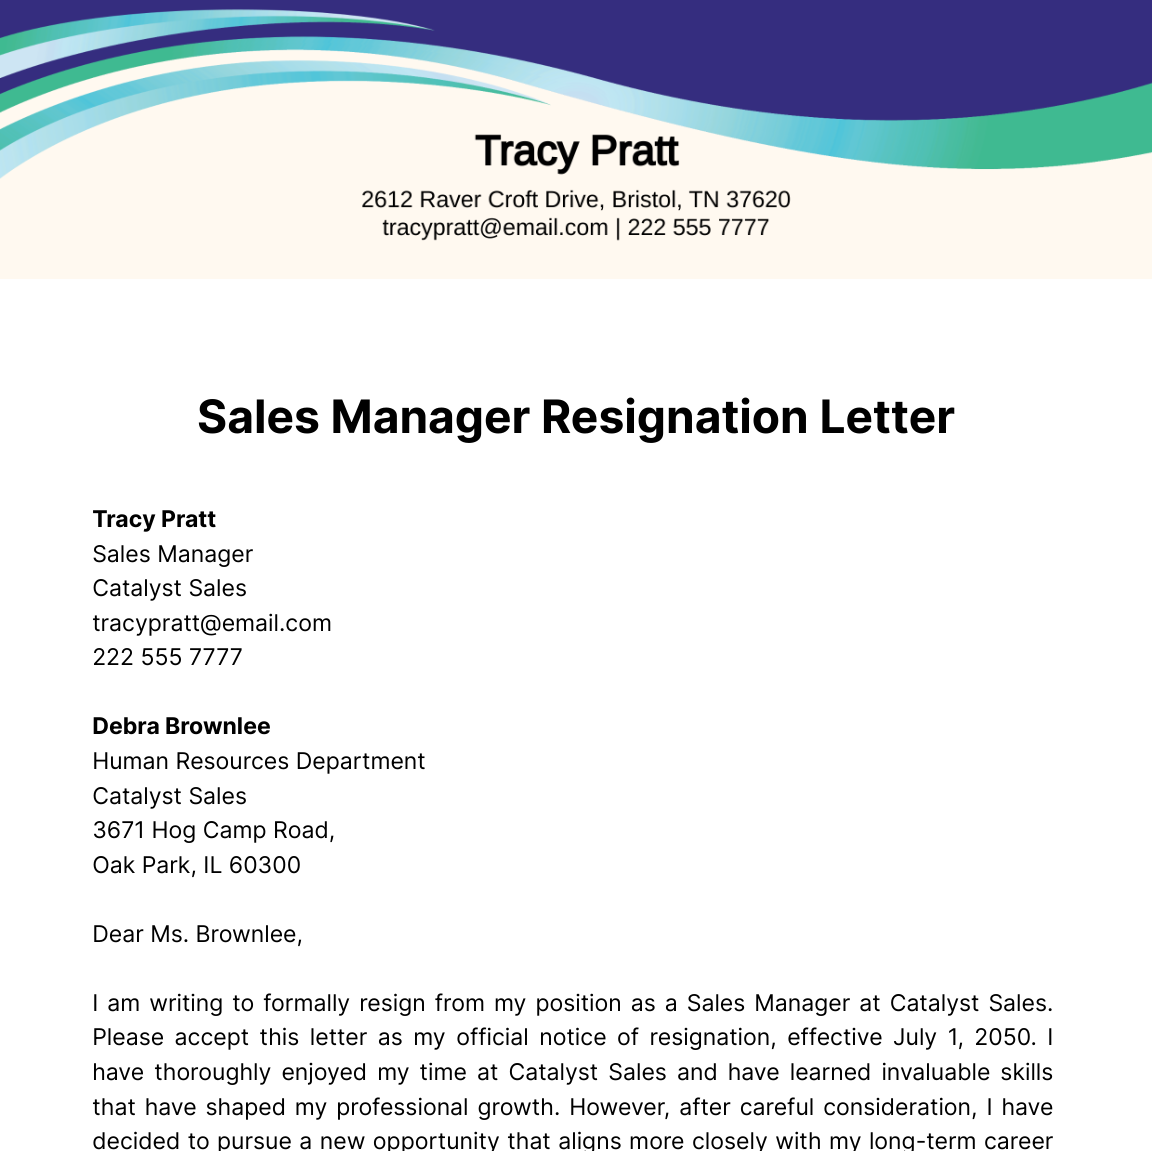 Sales Manager Resignation Letter  Template